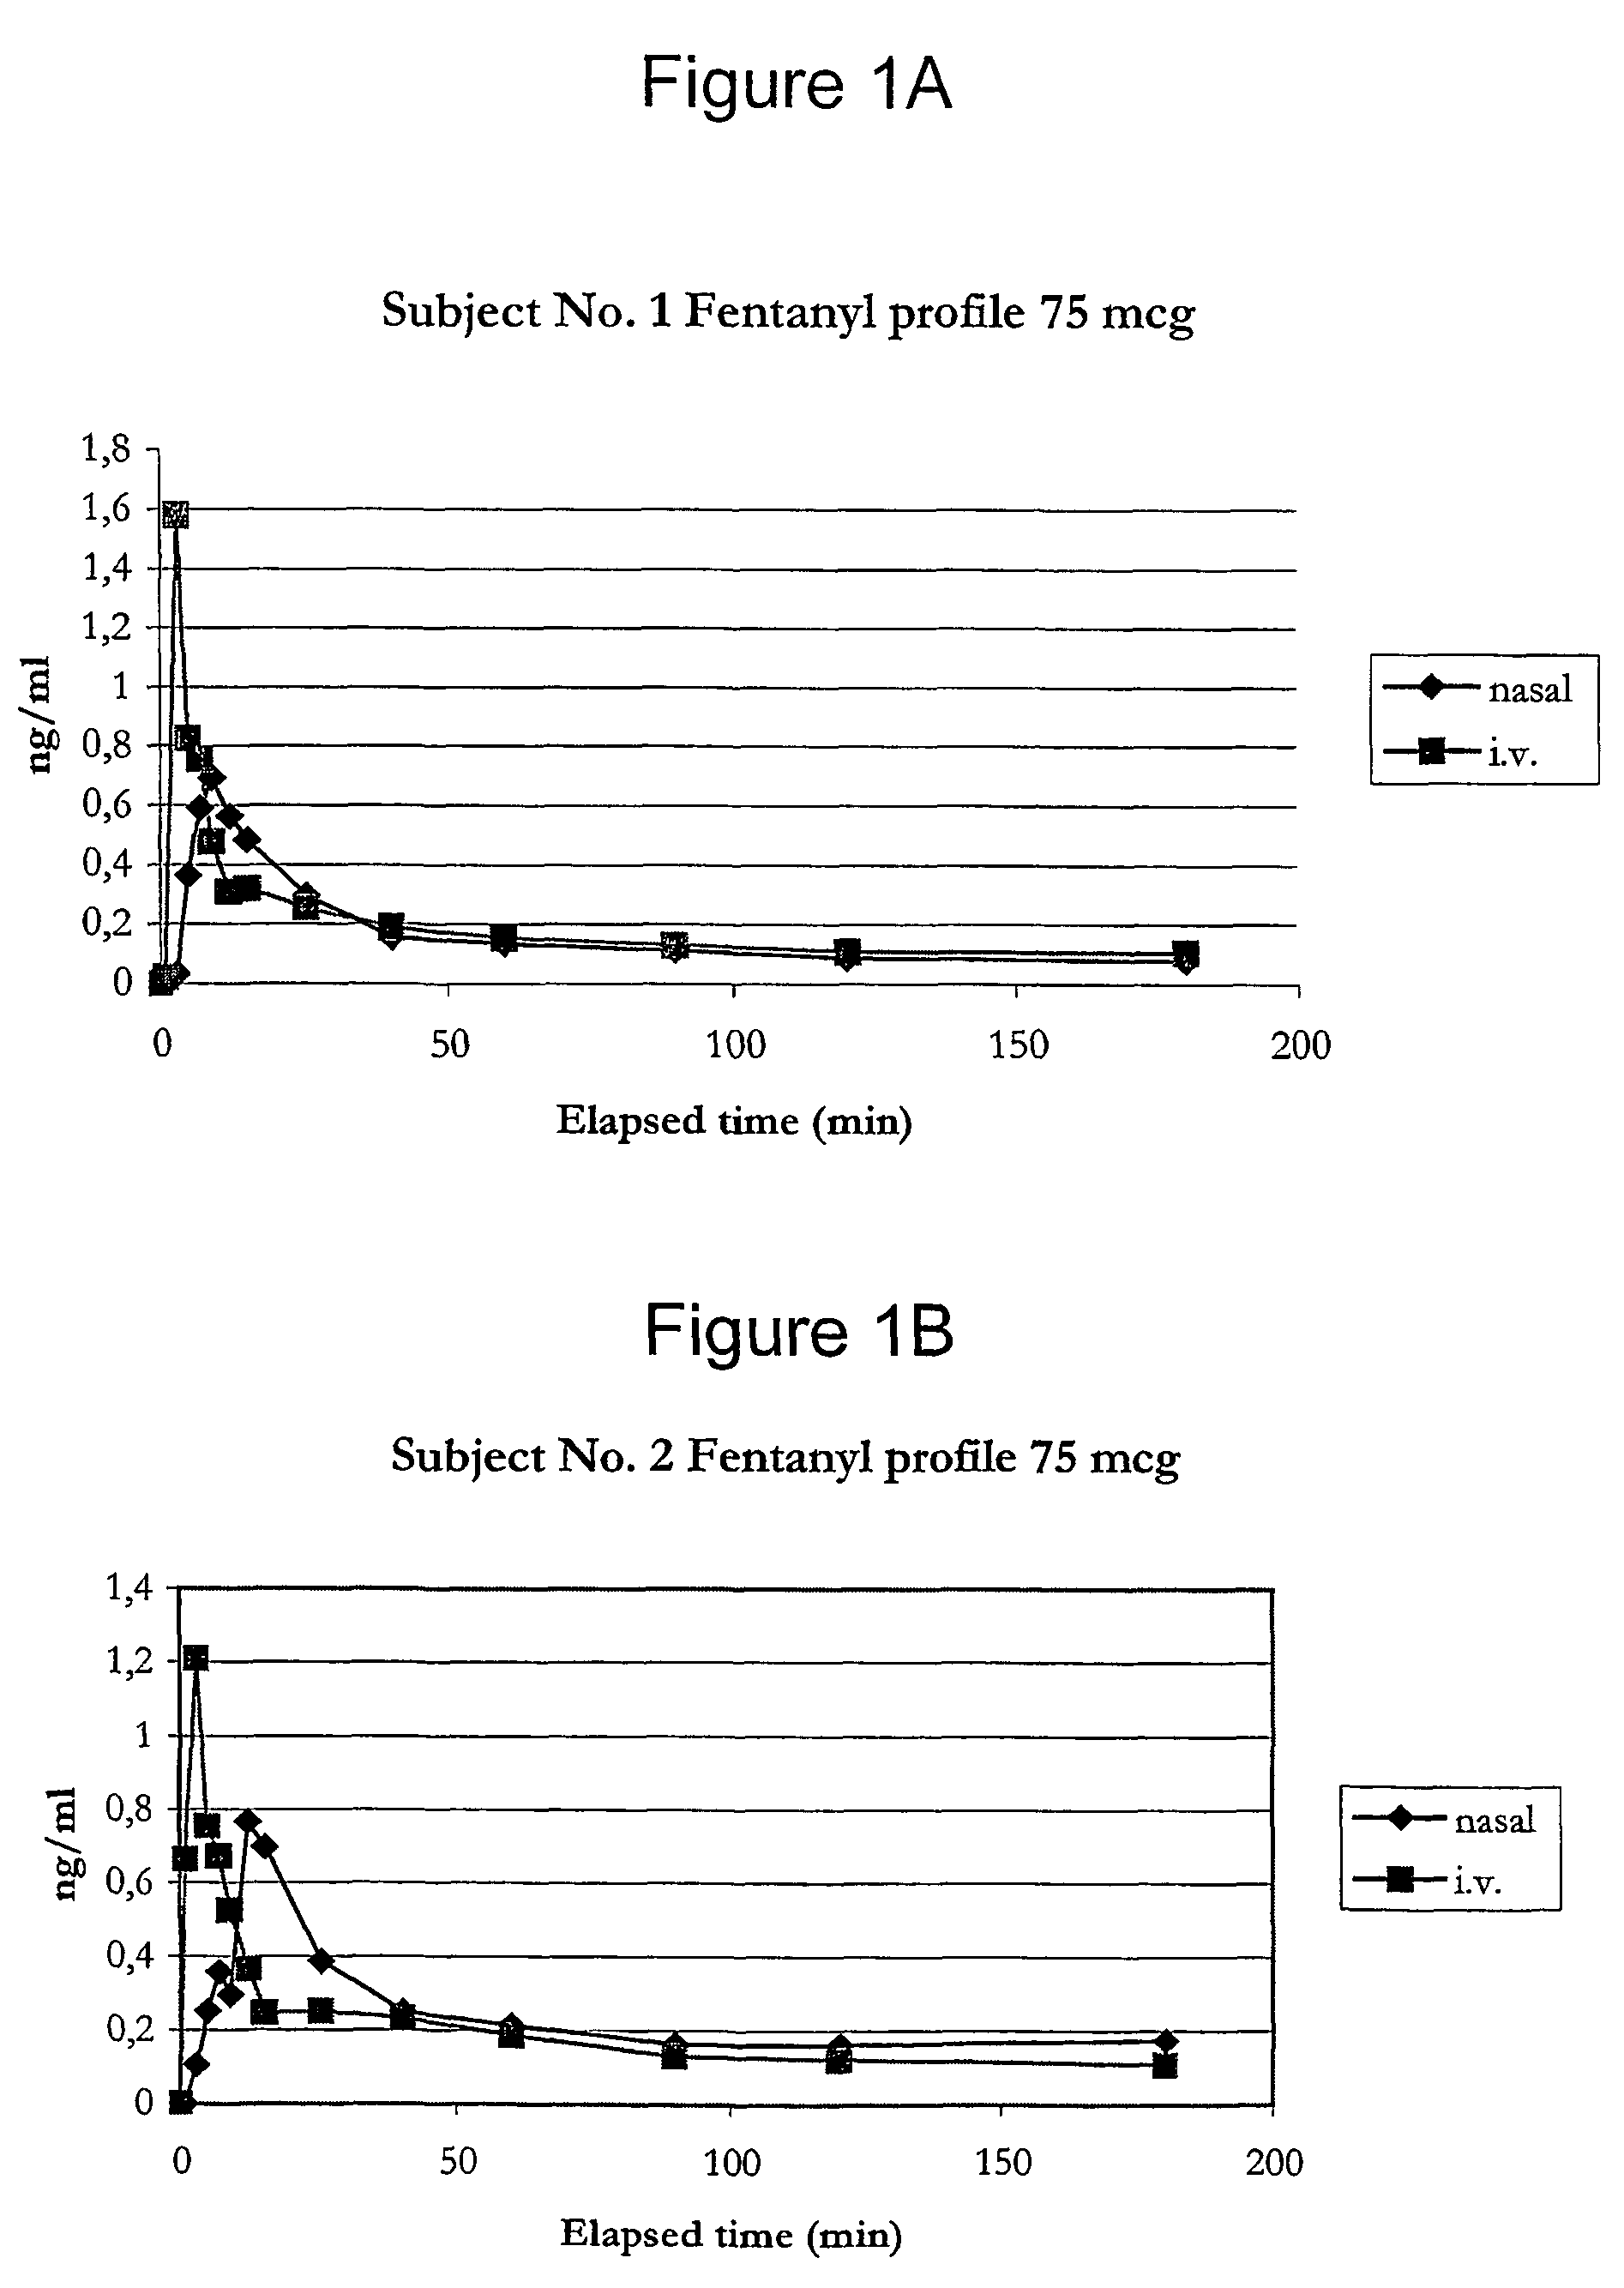 Fentanyl composition for nasal administration